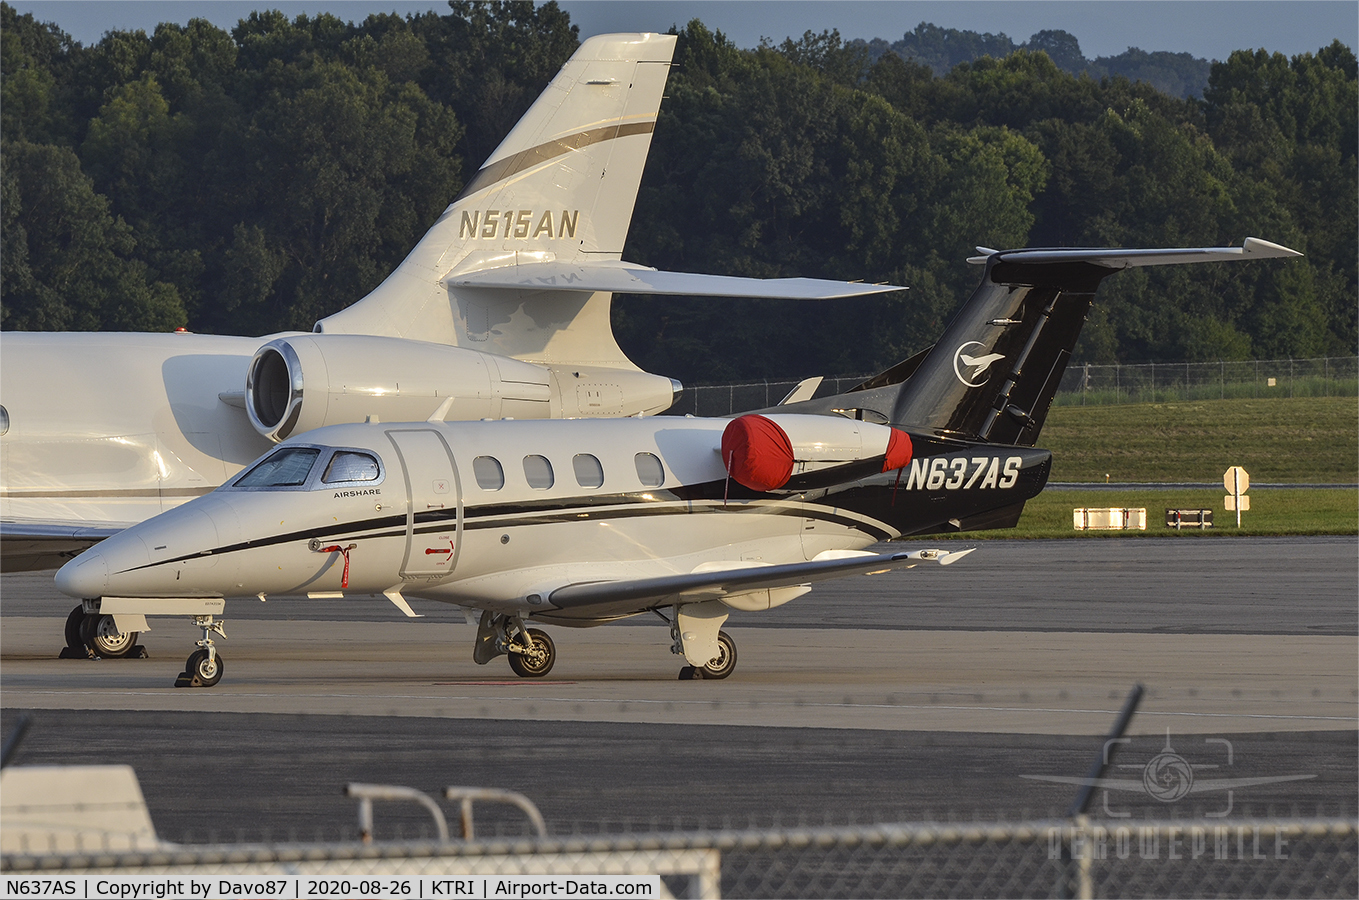 N637AS, 2010 Embraer EMB-500 Phenom 100 C/N 50000133, Parked at FBO Tri-Cities Aviation at Tri-Cities Airport